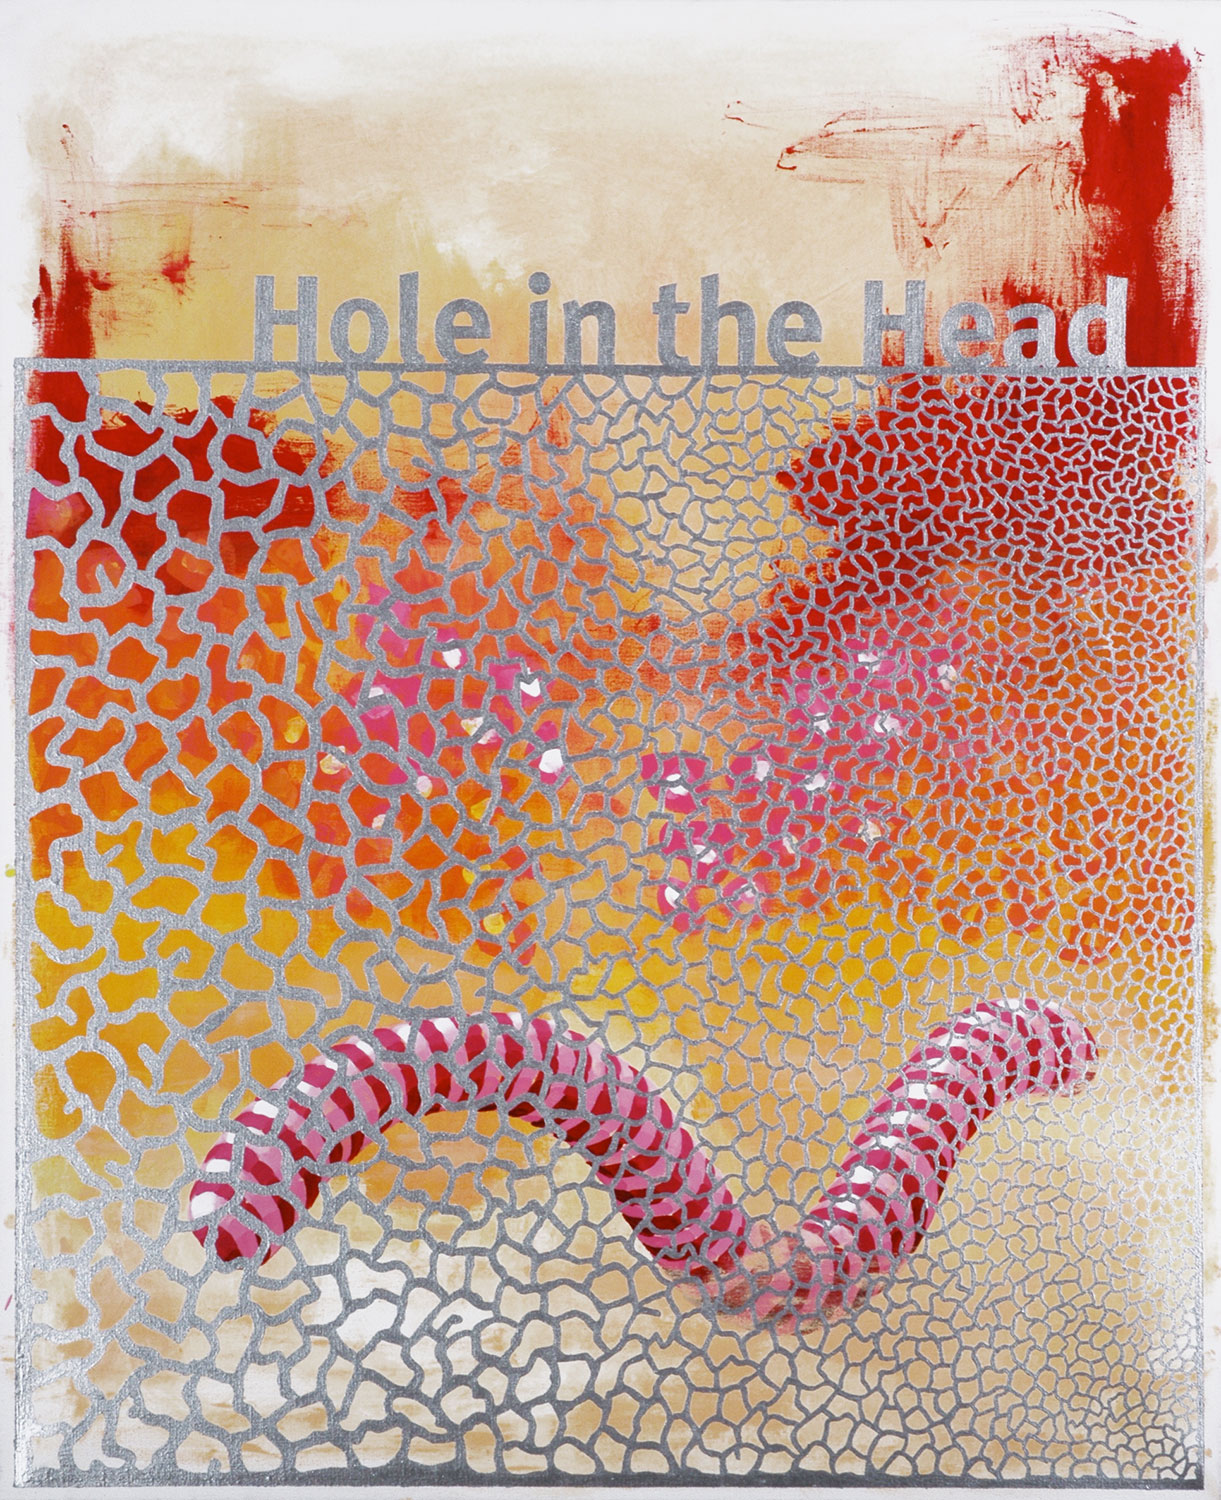 Hole in the Head, 120 x 90 cm, 2005